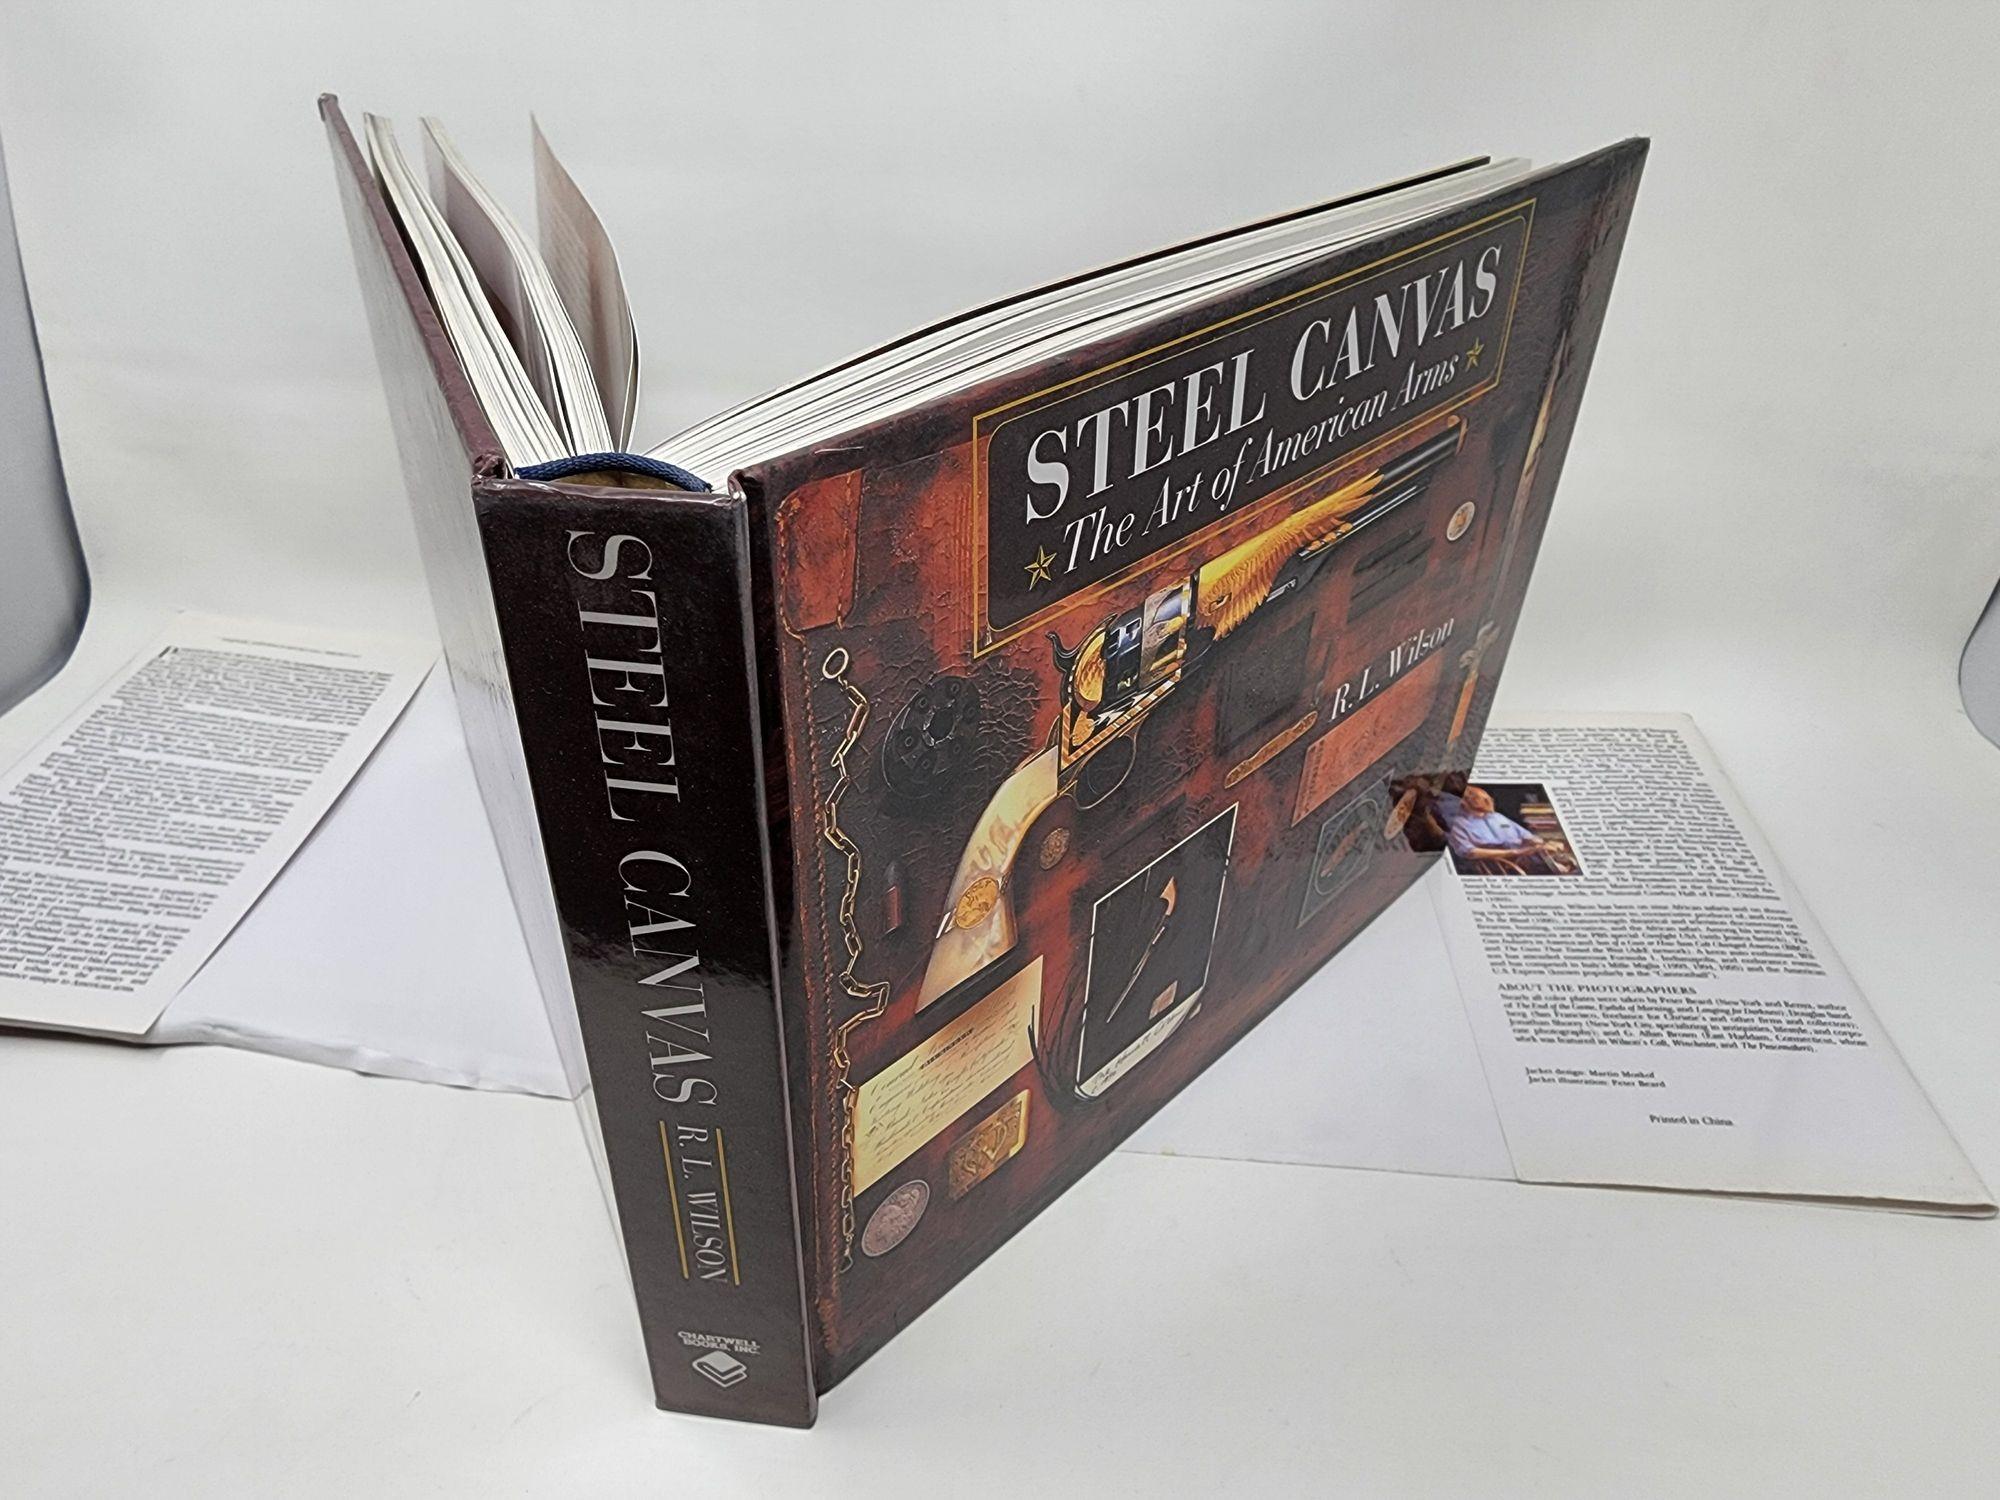 Steel Canvas The Art of American Arms Hardcover Book by Robert Lawrence Wilson.Wilson offers the first book on the extraordinary spectacle of America's finest firearms from the mid-1700s until today. Here in full color are exquisite engravings,